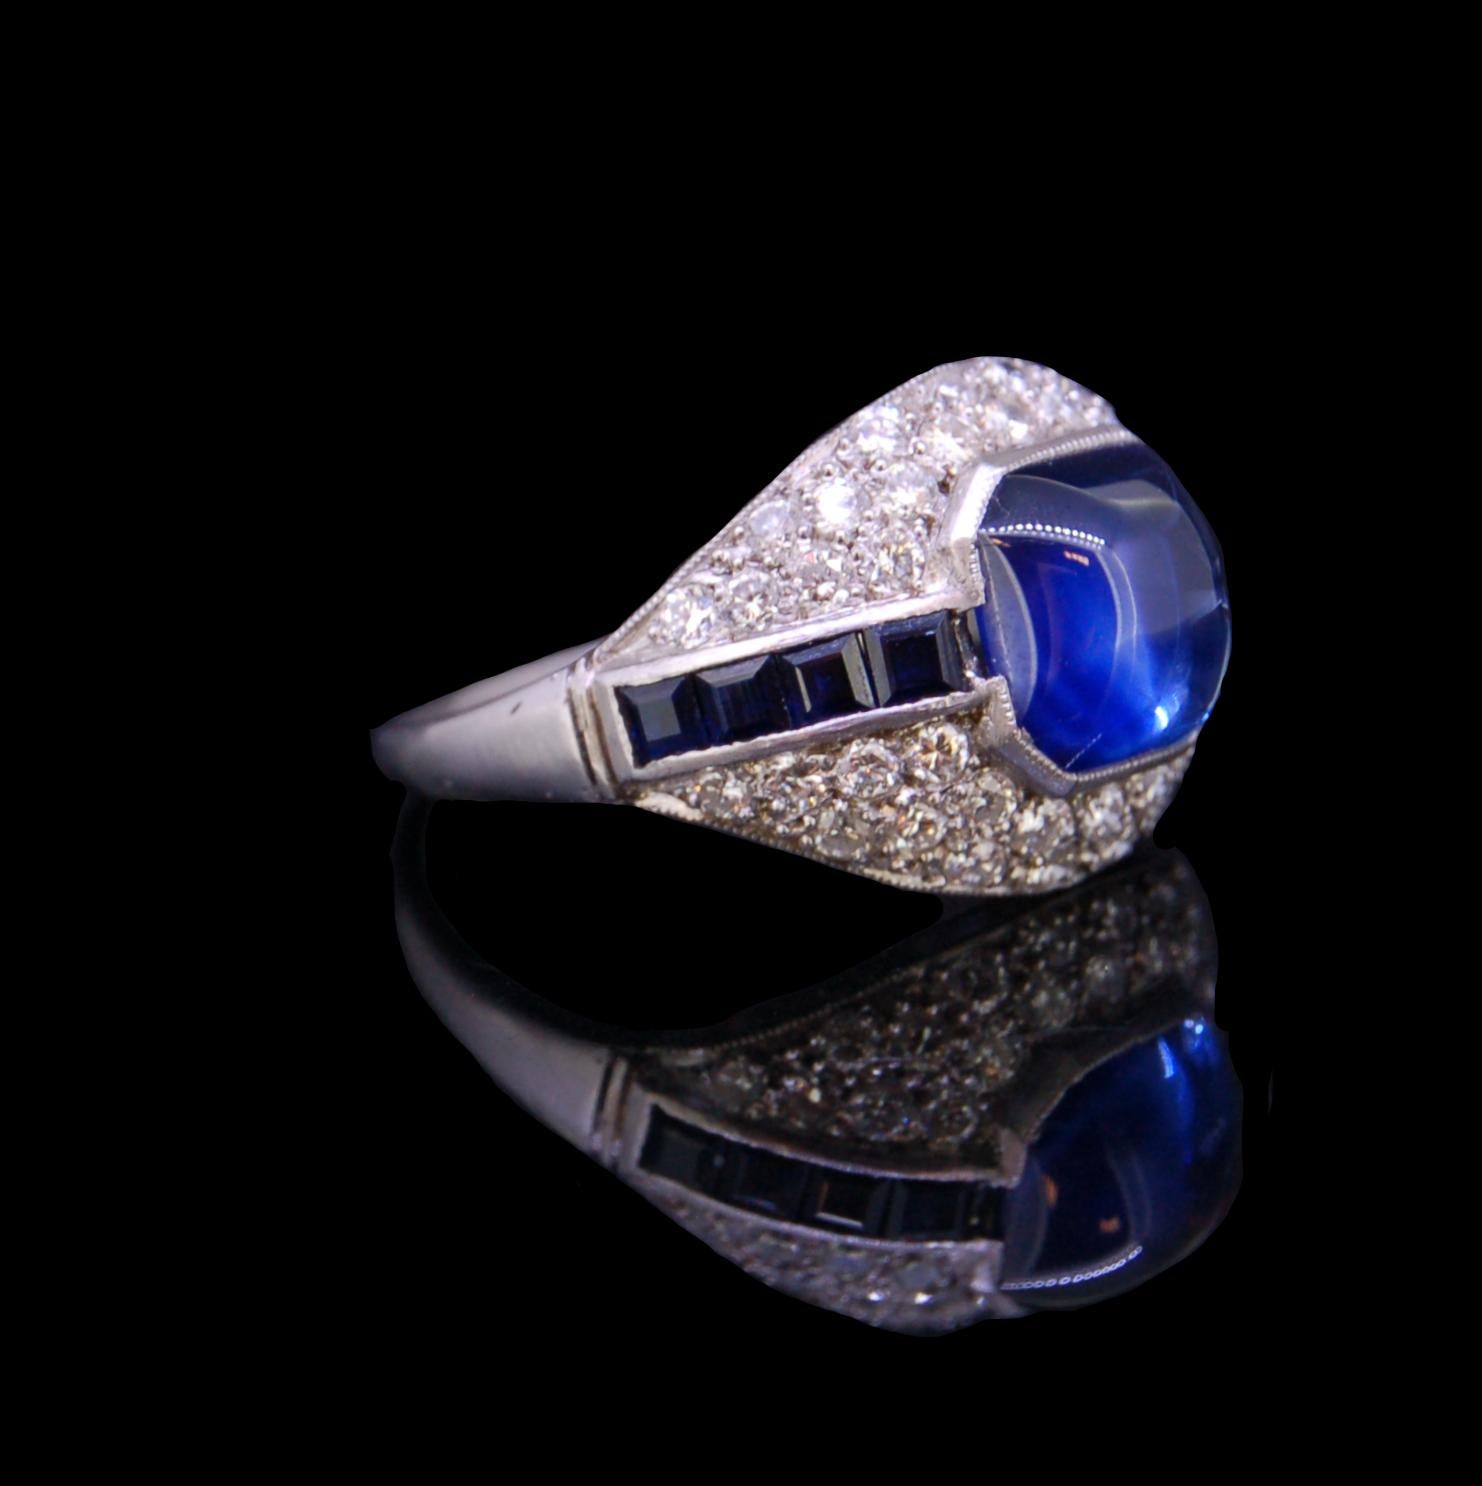 ART-DECO STYLE SAPPHIRE AND DIAMOND RING, centrally set with a cabochon cut sapphire, flanked by square cut blue sapphires and brilliant cut diamonds. Sapphires totalling approx. 3.80 ct. Diamonds totalling approx. 0.84 ct. Size Q. 5.1 grams.